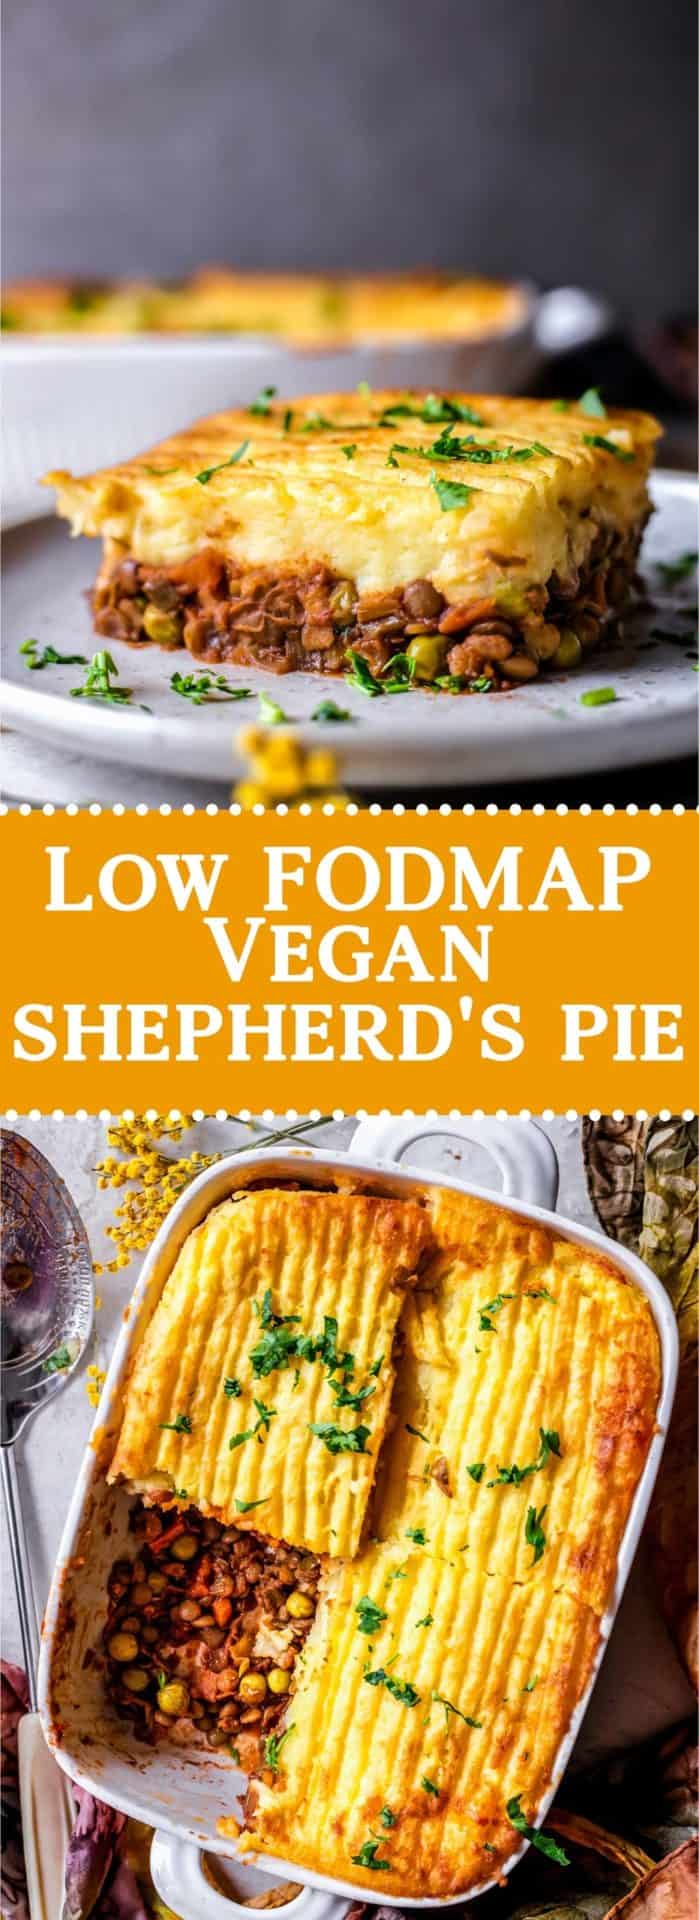 This Low FODMAP Vegan Shepherd's Pie is hearty, filling, comforting, tummy friendly, satisfying and so delicious!
